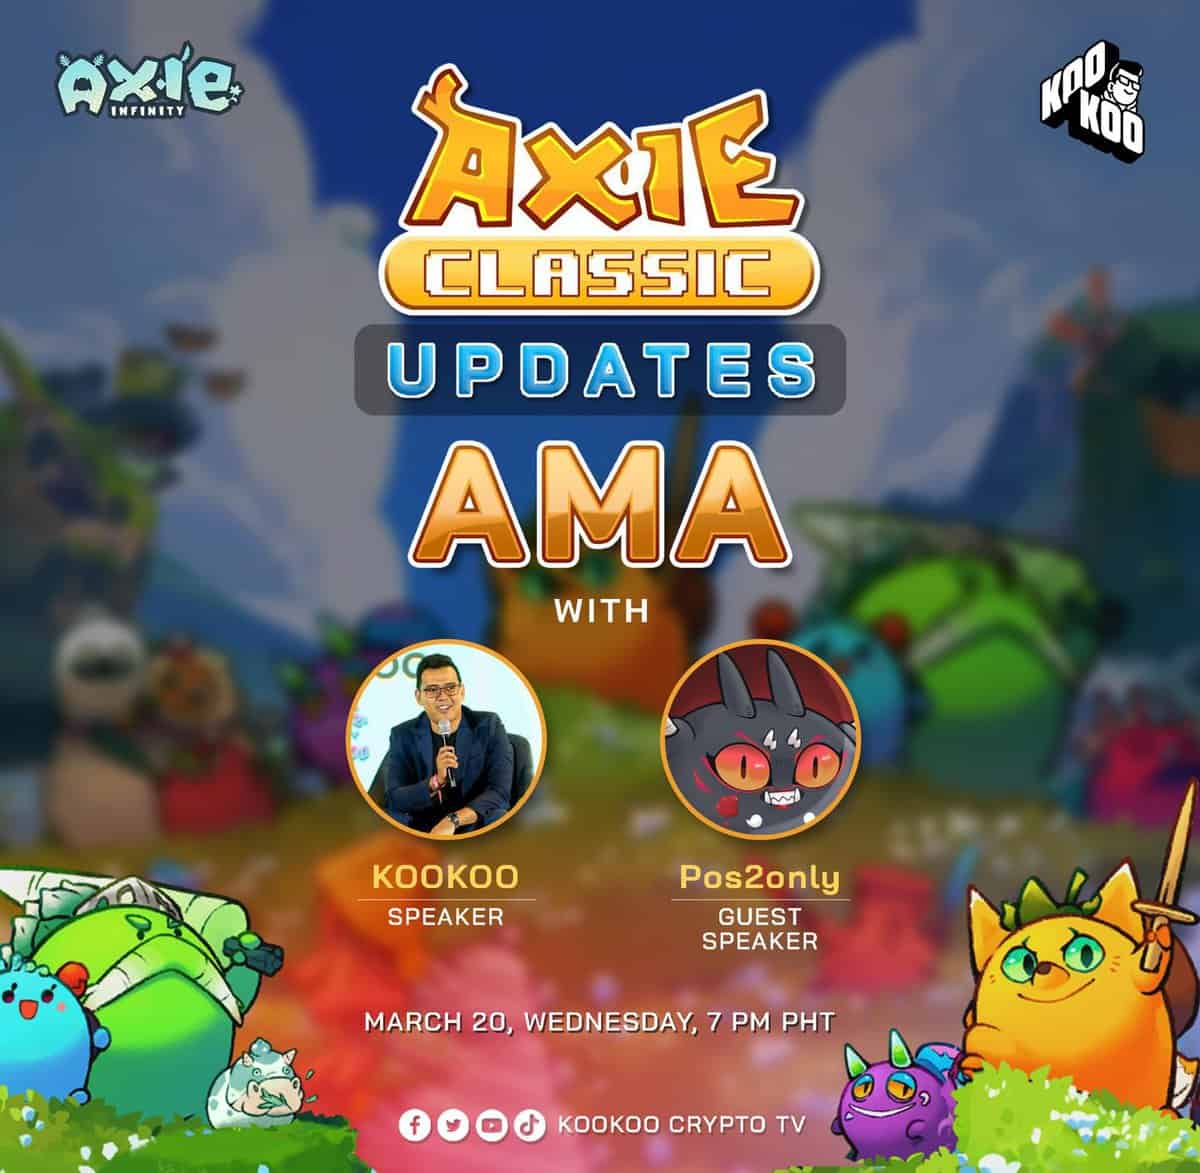 Axie Classic Updates AMA with Pos2only | Kookoo Crypto TV